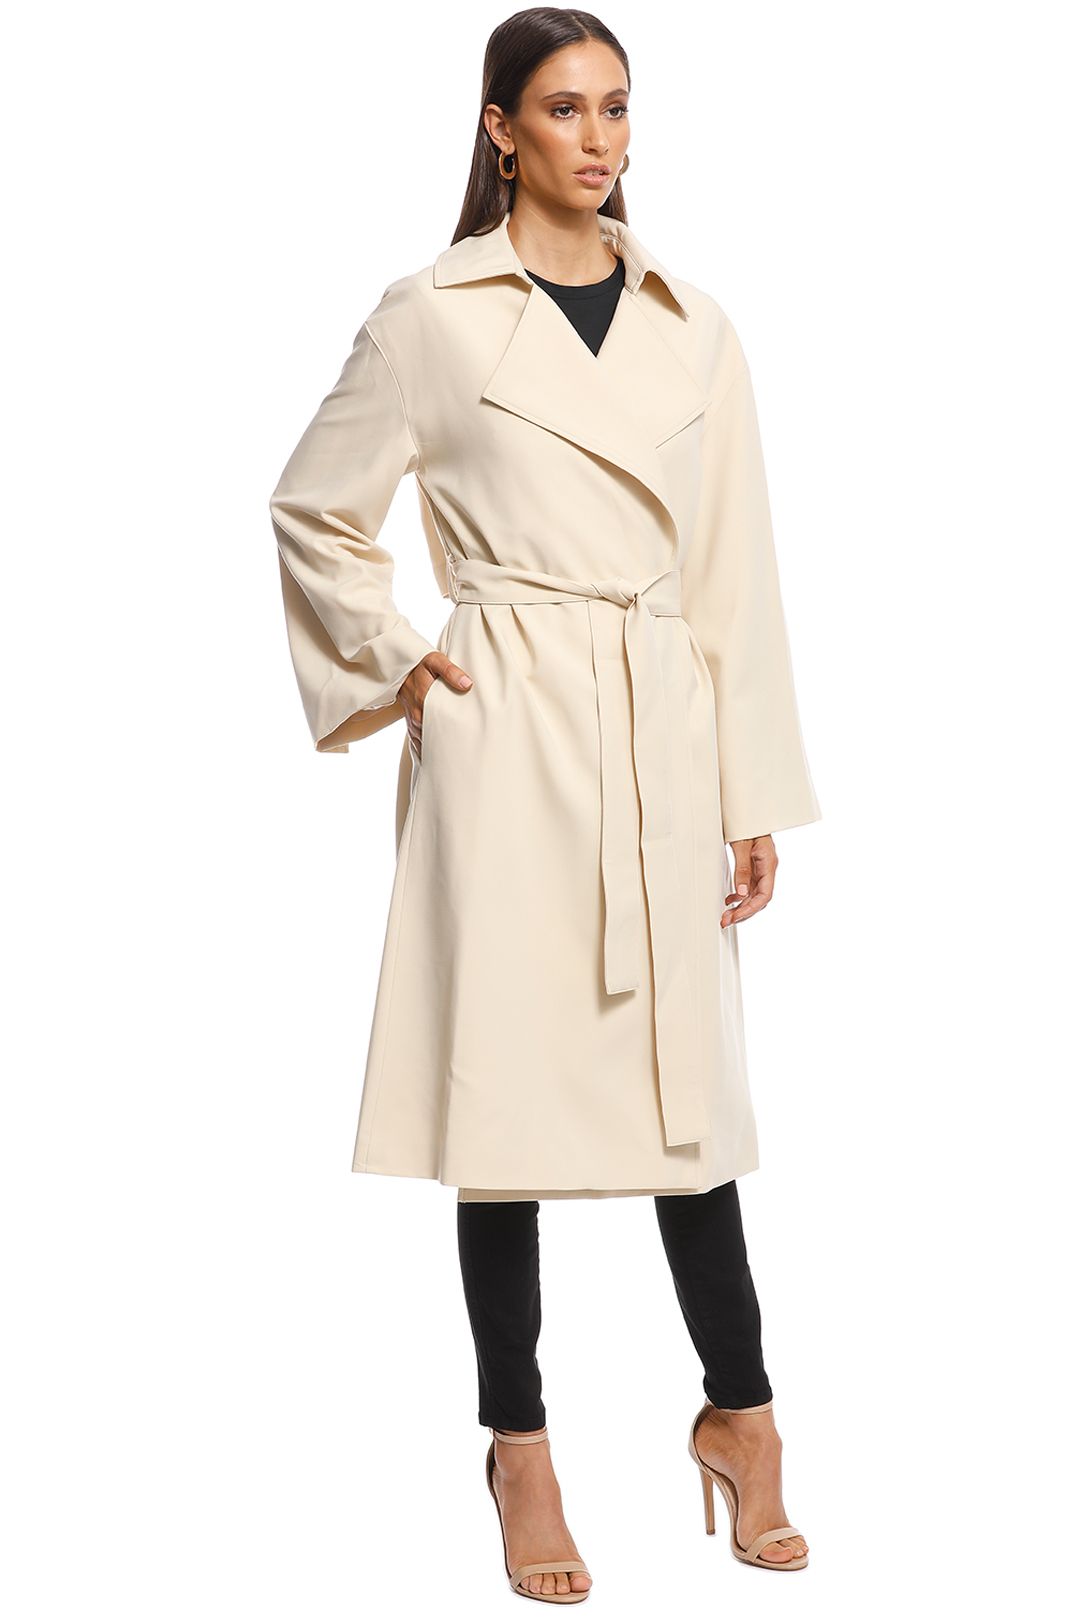 Friend of Audrey - Emerson Oversized Trench Coat - Sand - Side